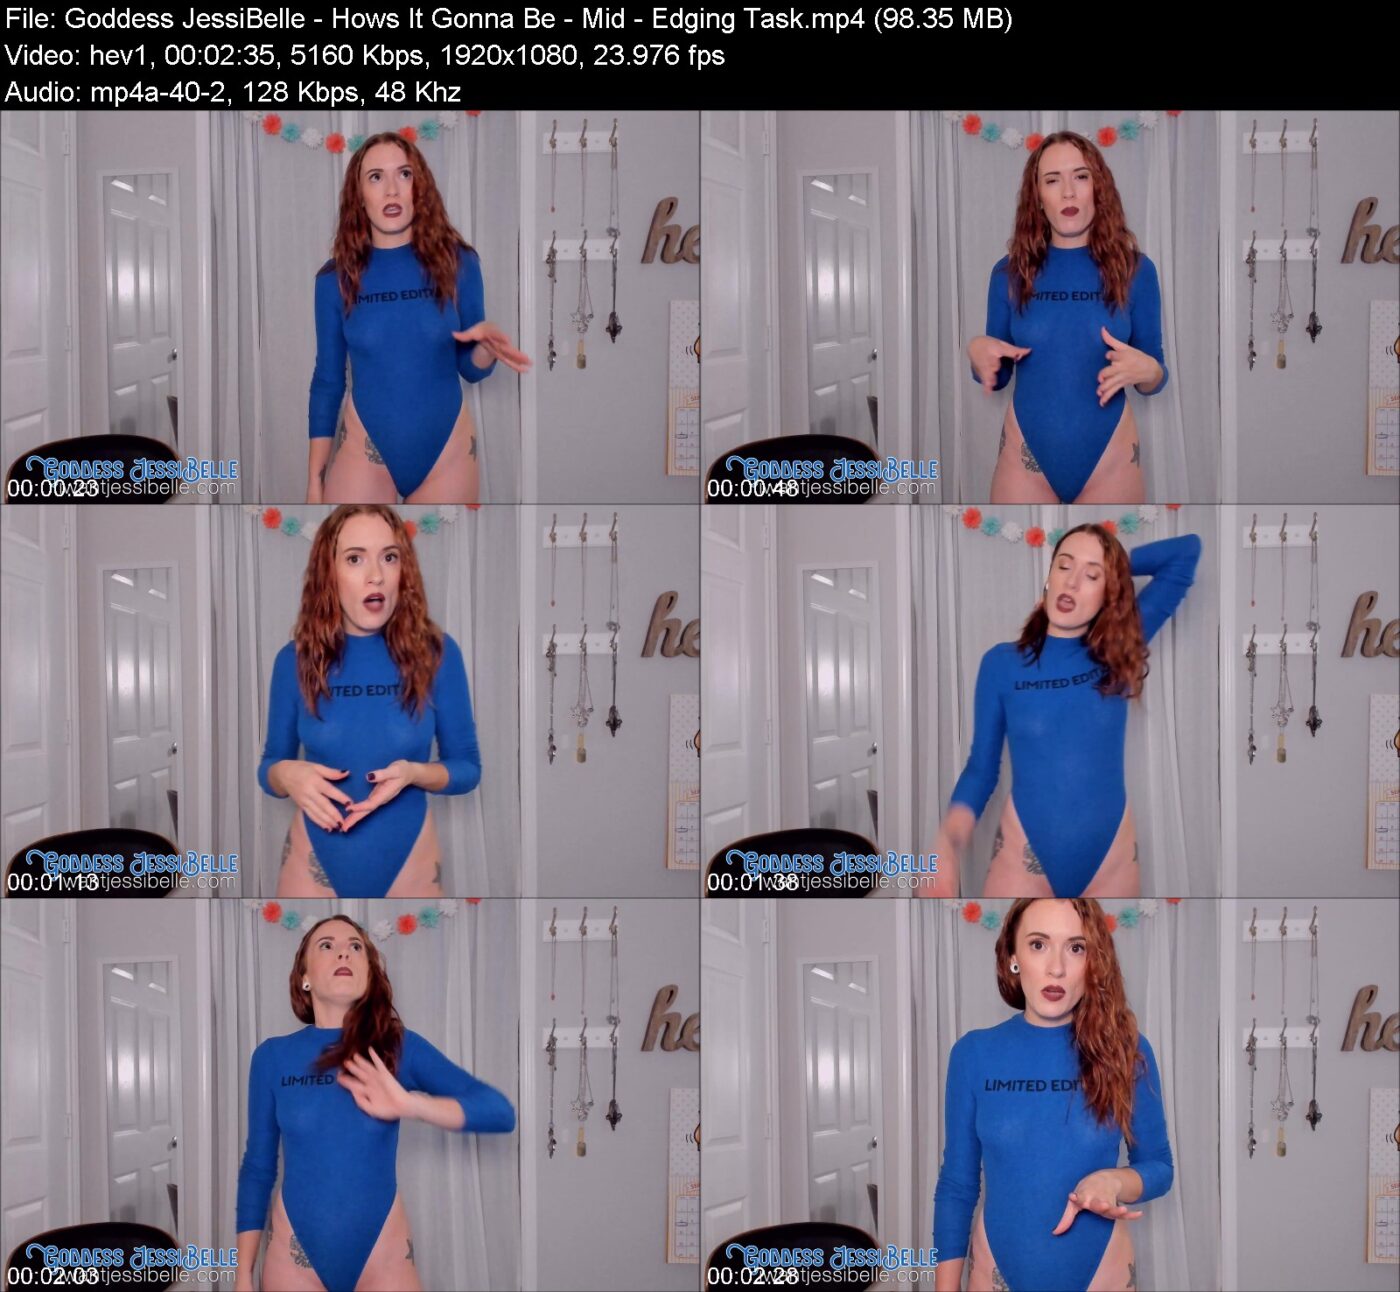 Actress: Goddess JessiBelle. Title and Studio: Hows It Gonna Be – Mid – Edging Task